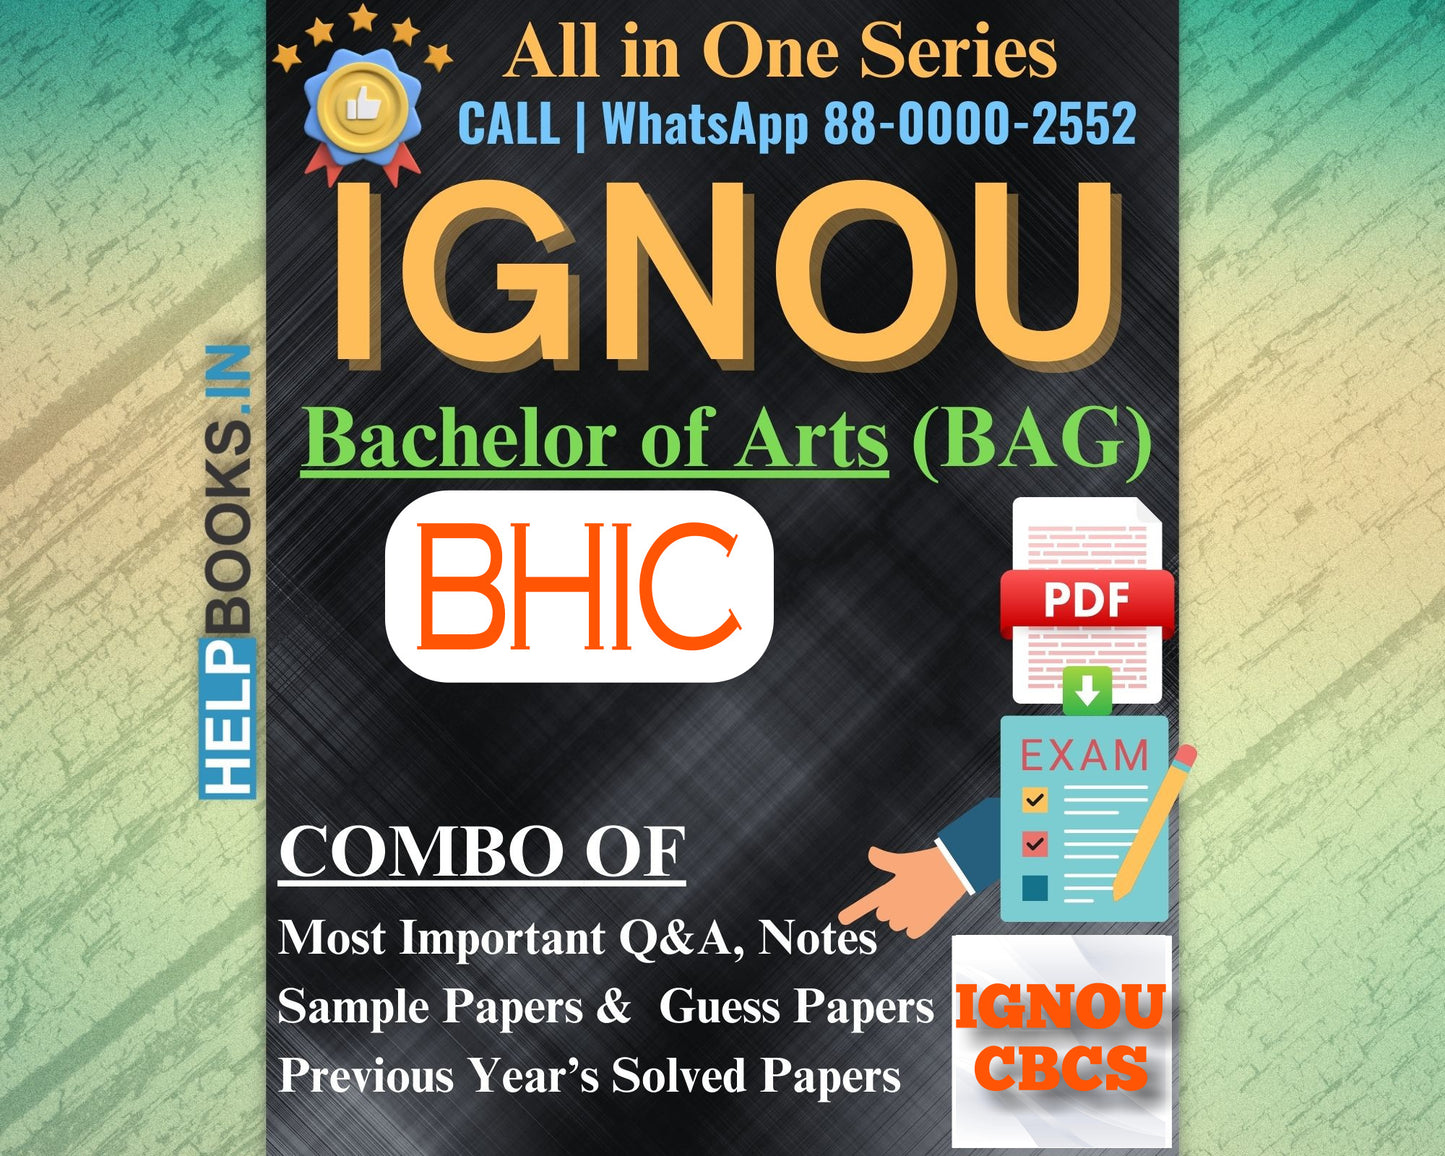 IGNOU BAG Online Study Package: Bachelor of Arts (BA) - Previous Year’s Solved Papers, Q&A, Exam Notes, Sample Papers, Guess Papers-BHIC131, BHIC132, BHIC133, BHIC134